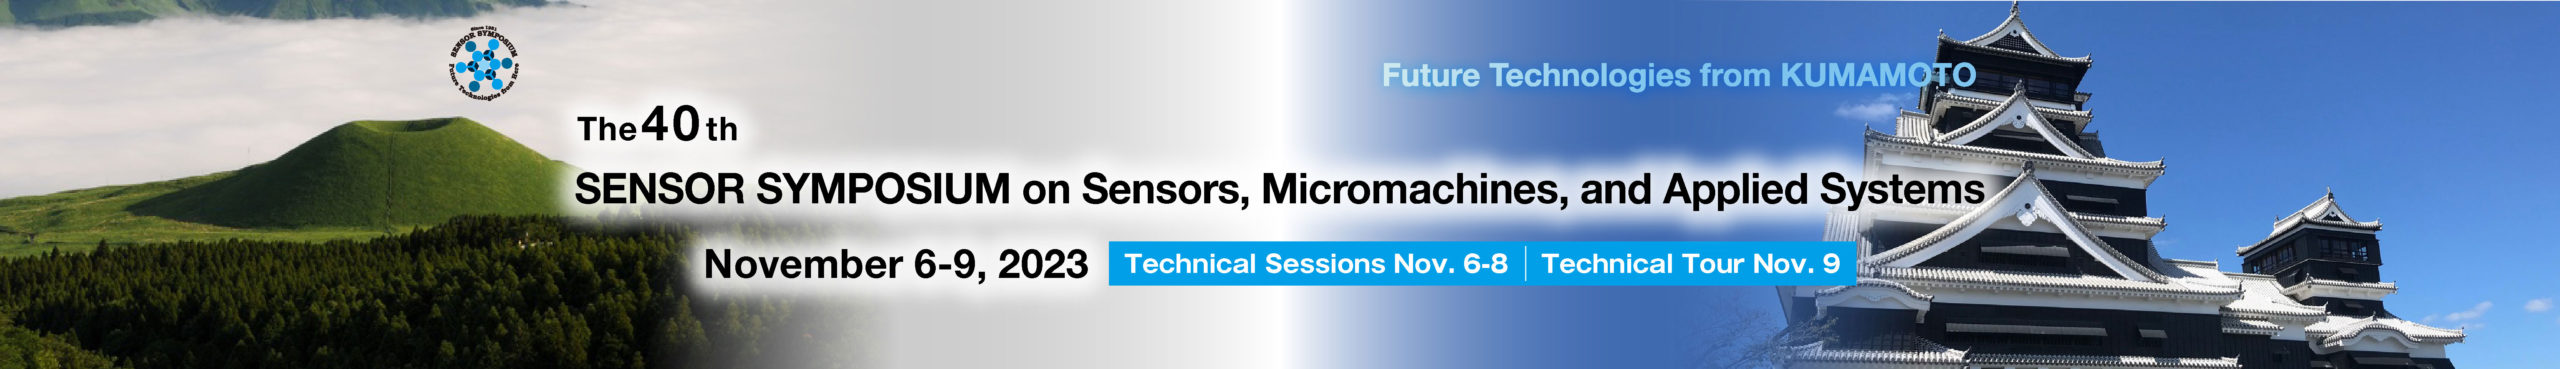 The 40th SENSOR SYMPOSIUM on Sensors, Micromachines, and Applied Systems (11/06 - 08) 出展通知